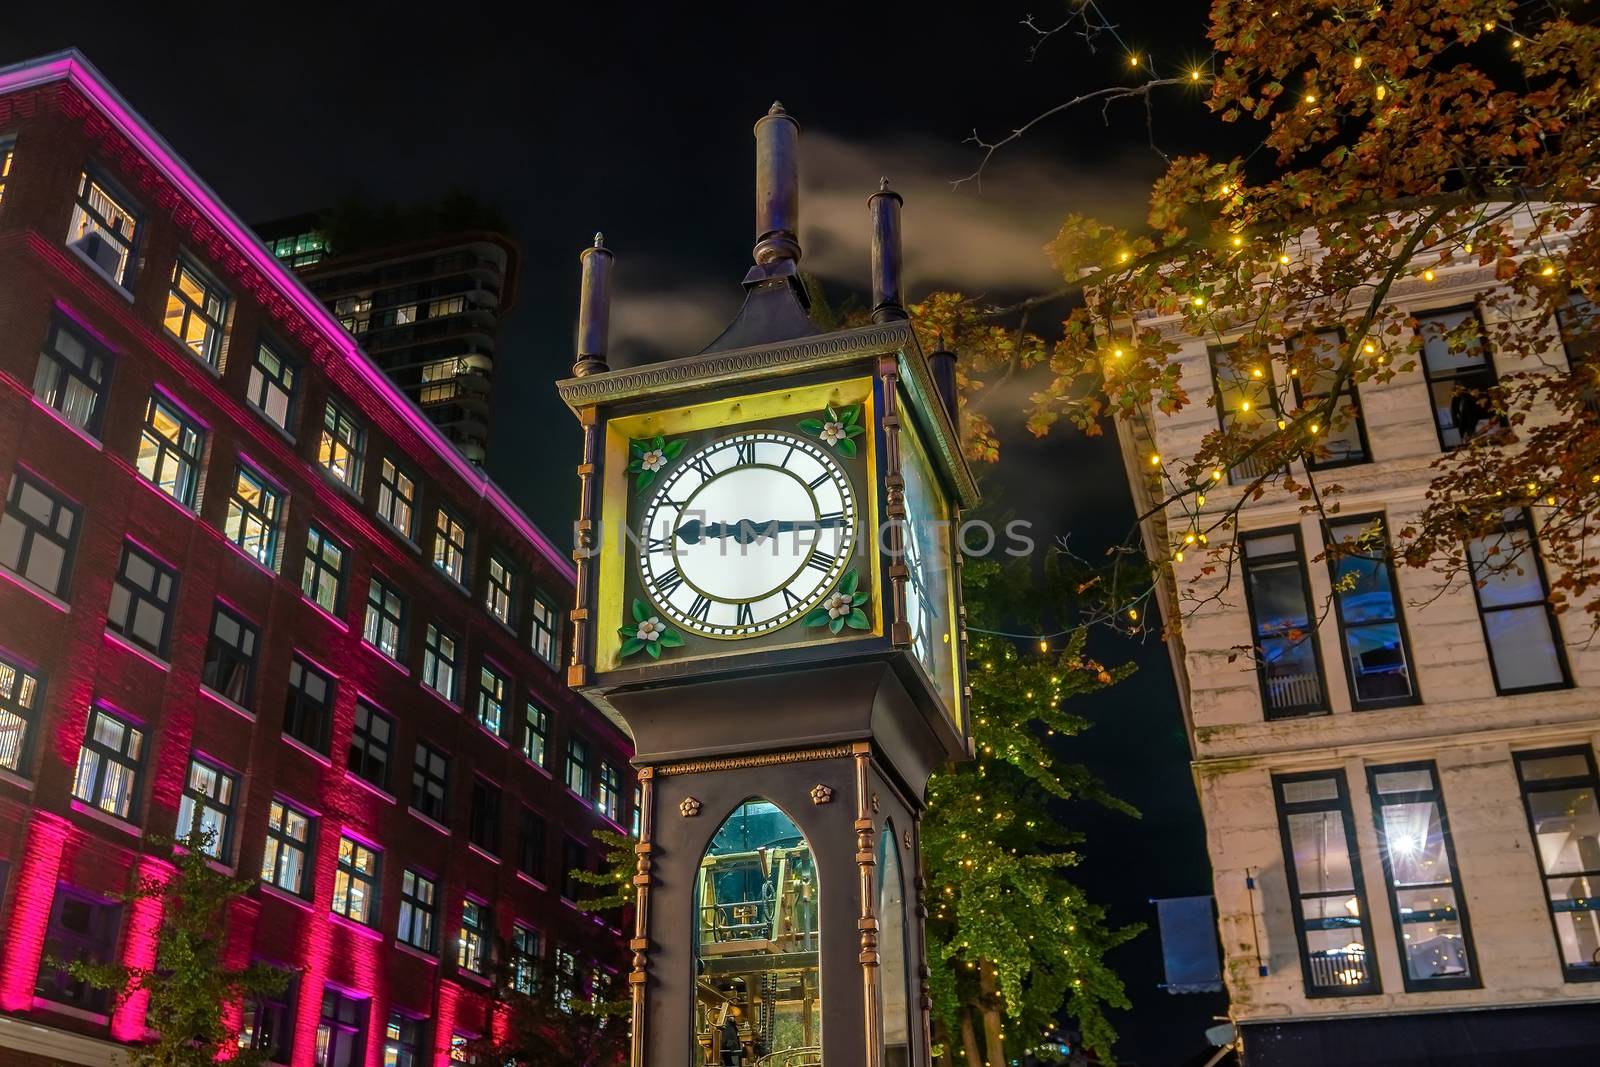 Old Steam Clock in Vancouver's historic Gastown district at nigh by f11photo